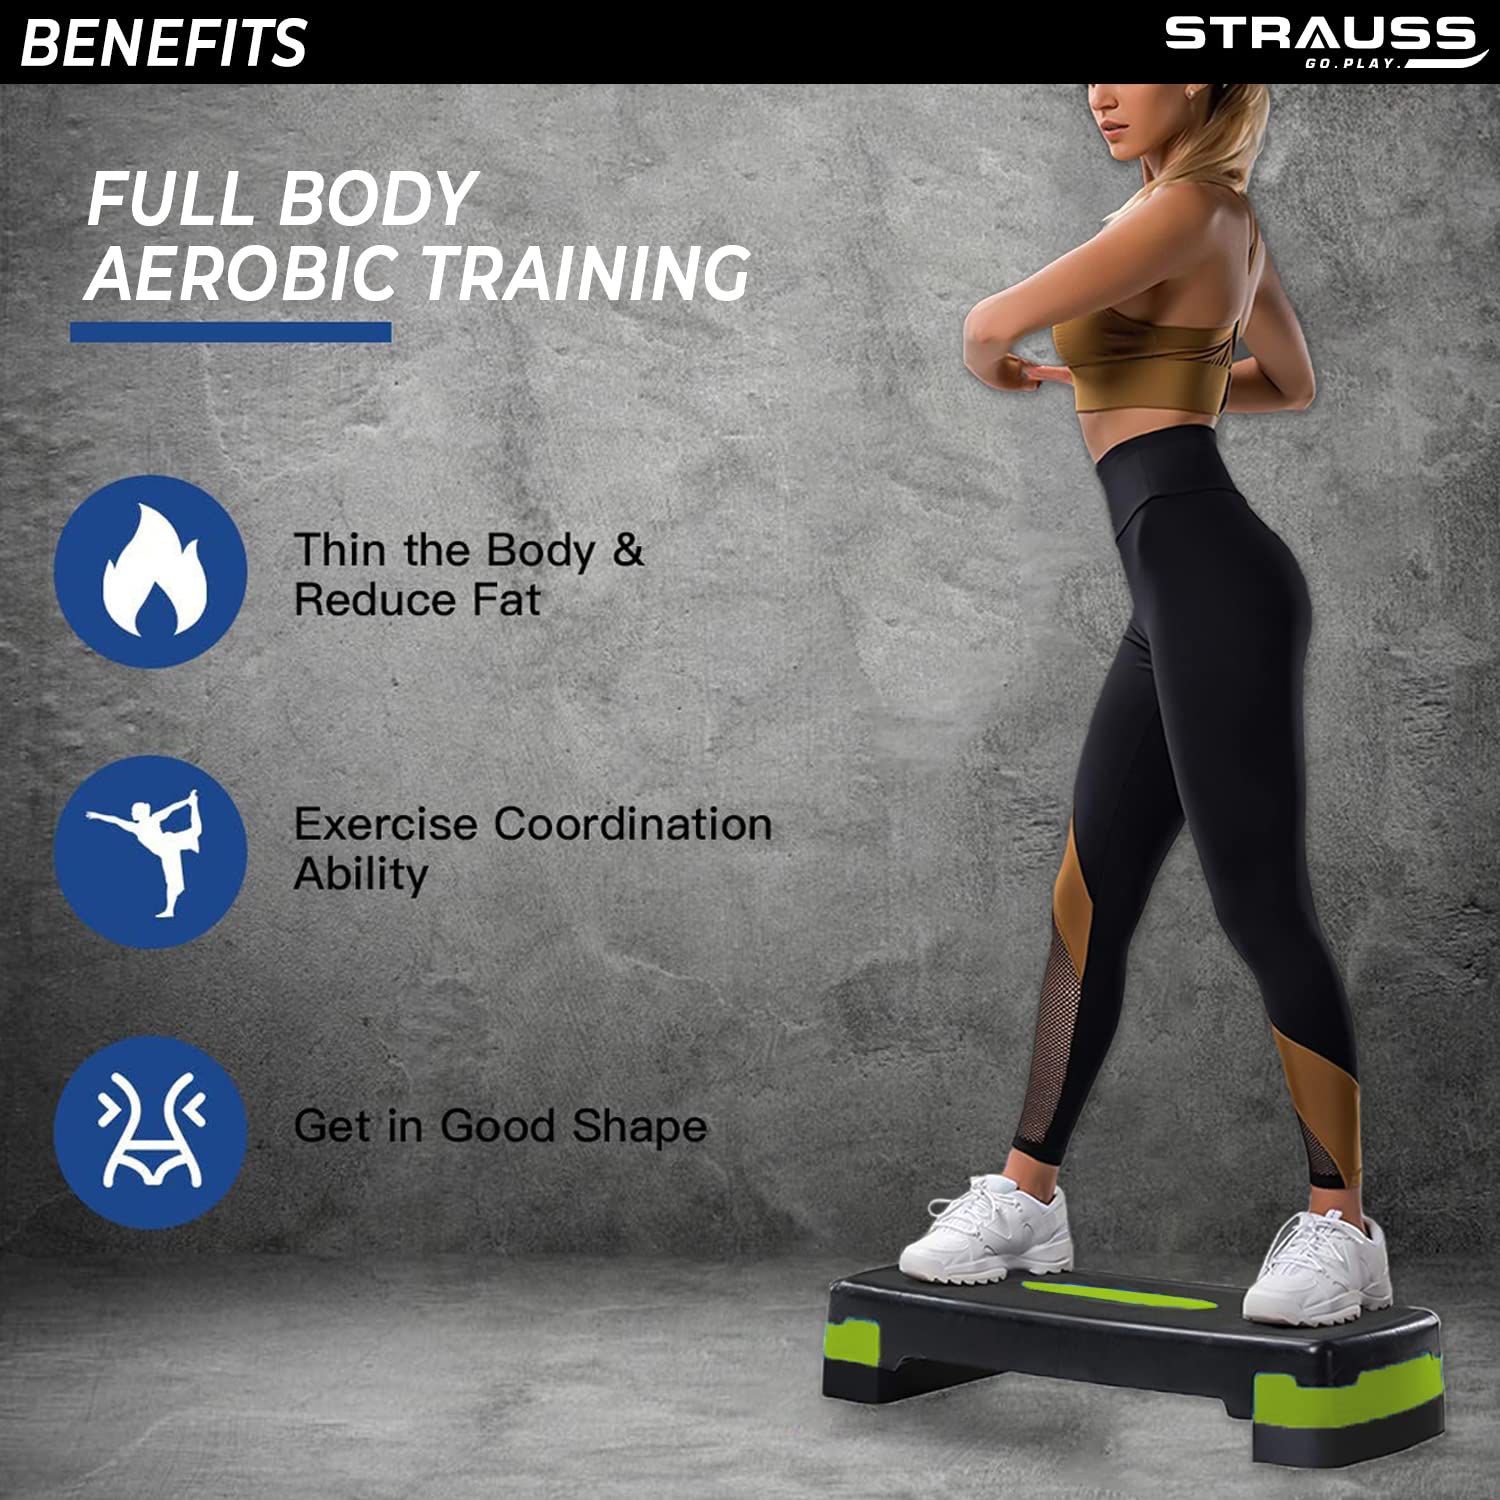 Strauss Aerobic Stepper | Two Height Level Adjustments - 4 inches and 6 inches | Ideal For Cardio Workout, Lower Body Toning and Calorie Burning | Slip-Resistant & Shock Absorbing Platform for Extra-Durability - Supports Upto 200 KG, (Green)